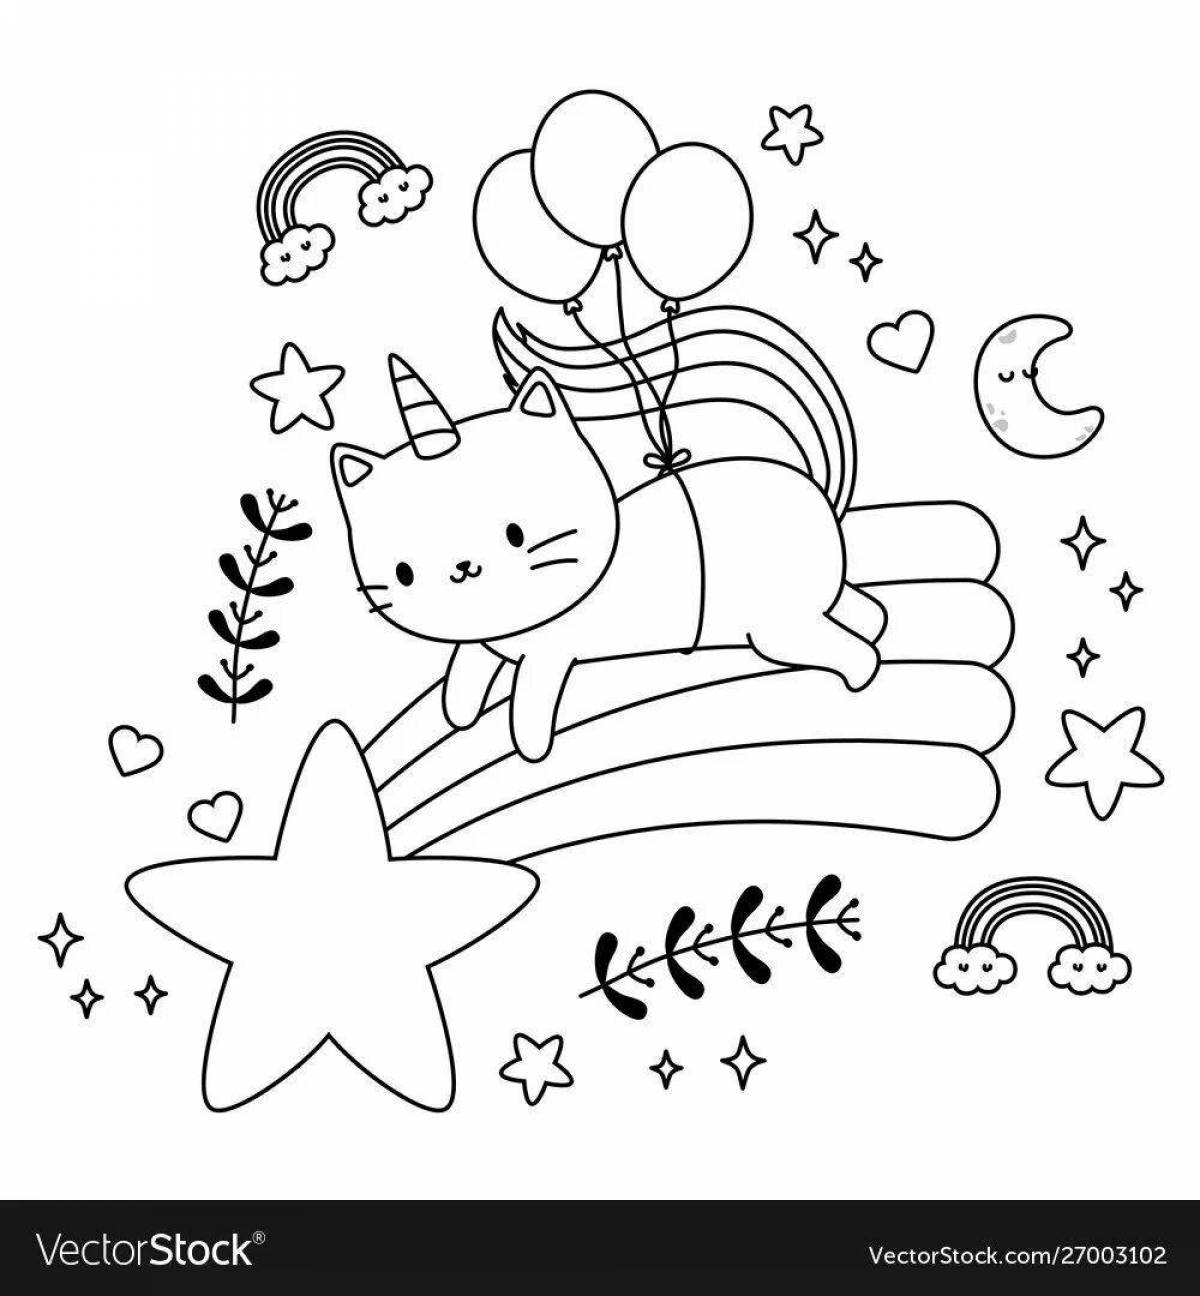 Coloring page rainbow cat sparkling felicity